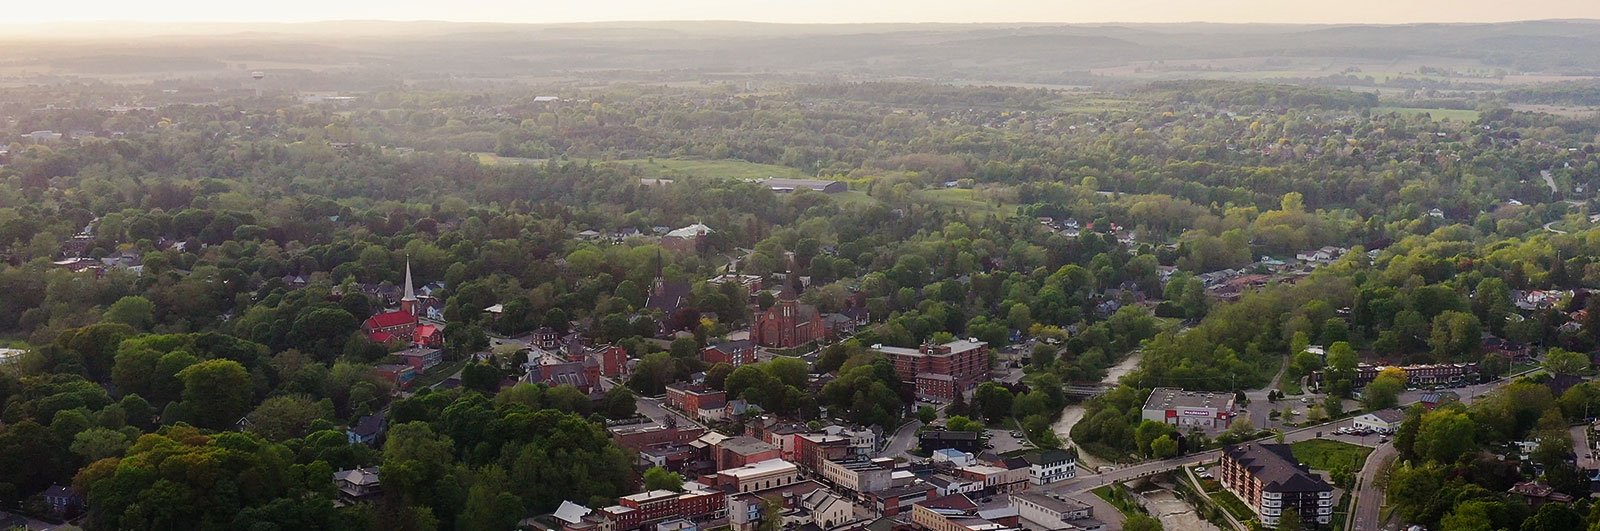 Aerial view of urban and rural Port Hope